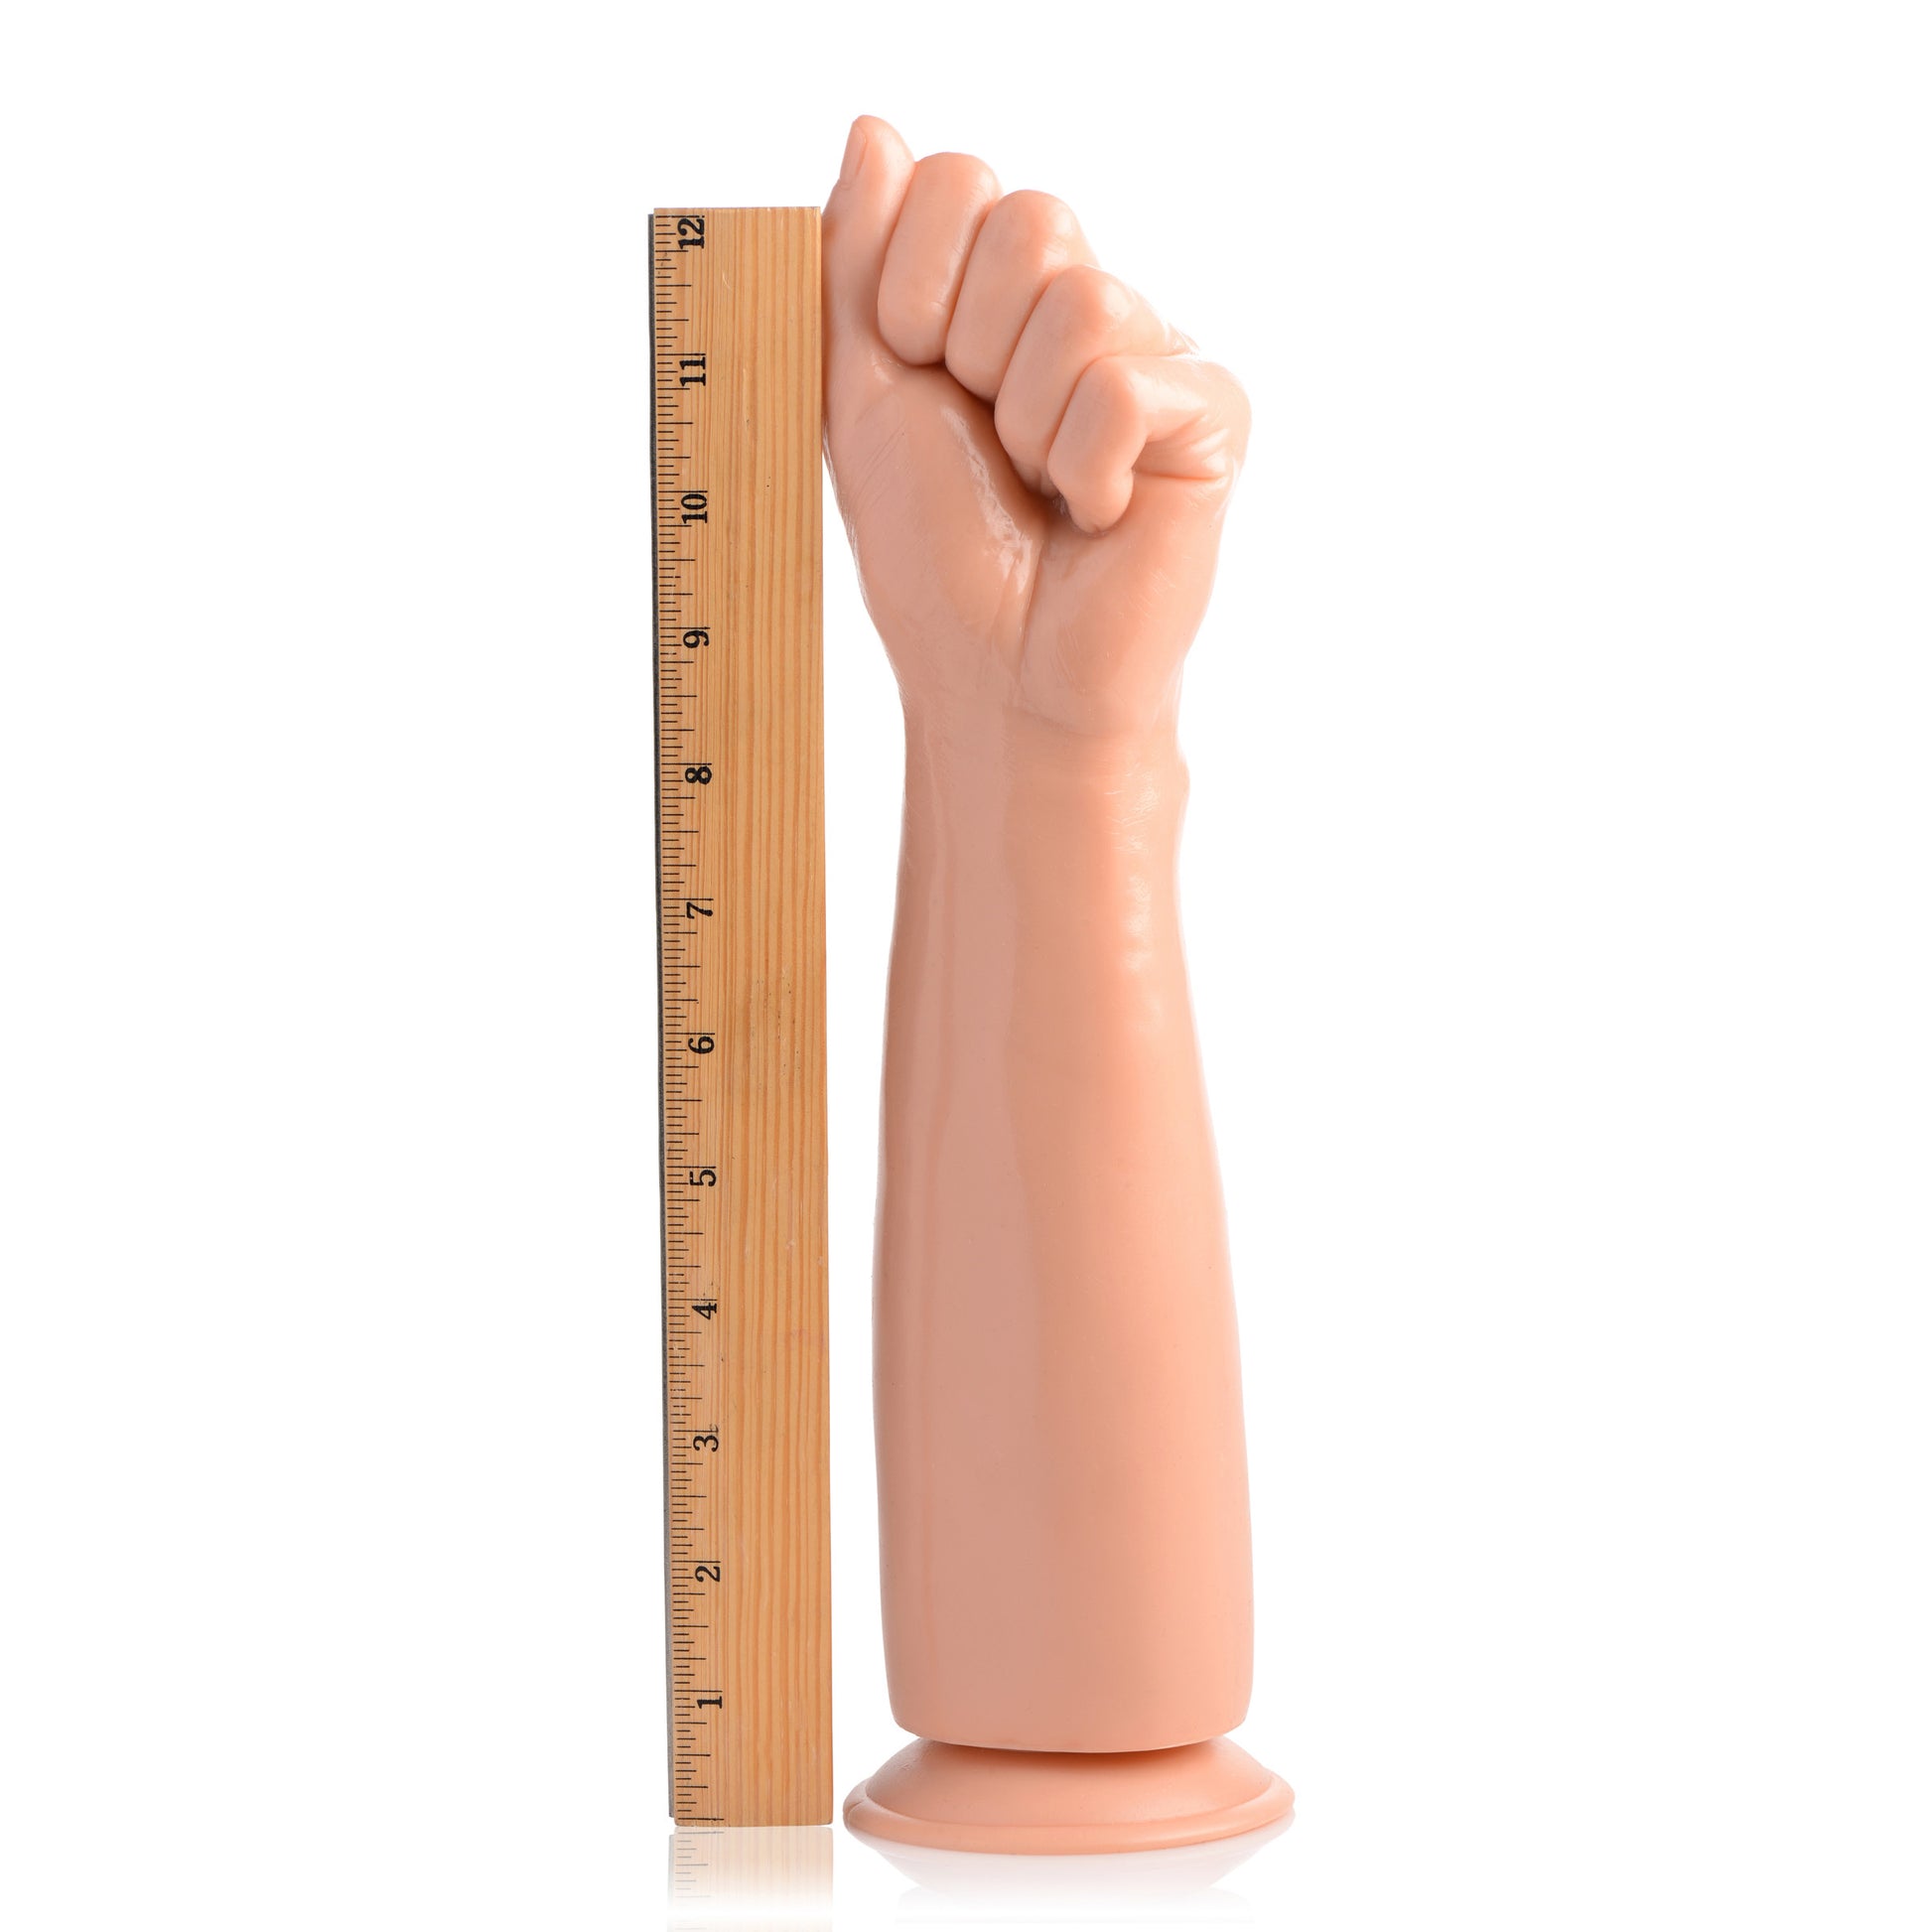 Fisto Clenched Fist Dildo - UABDSM